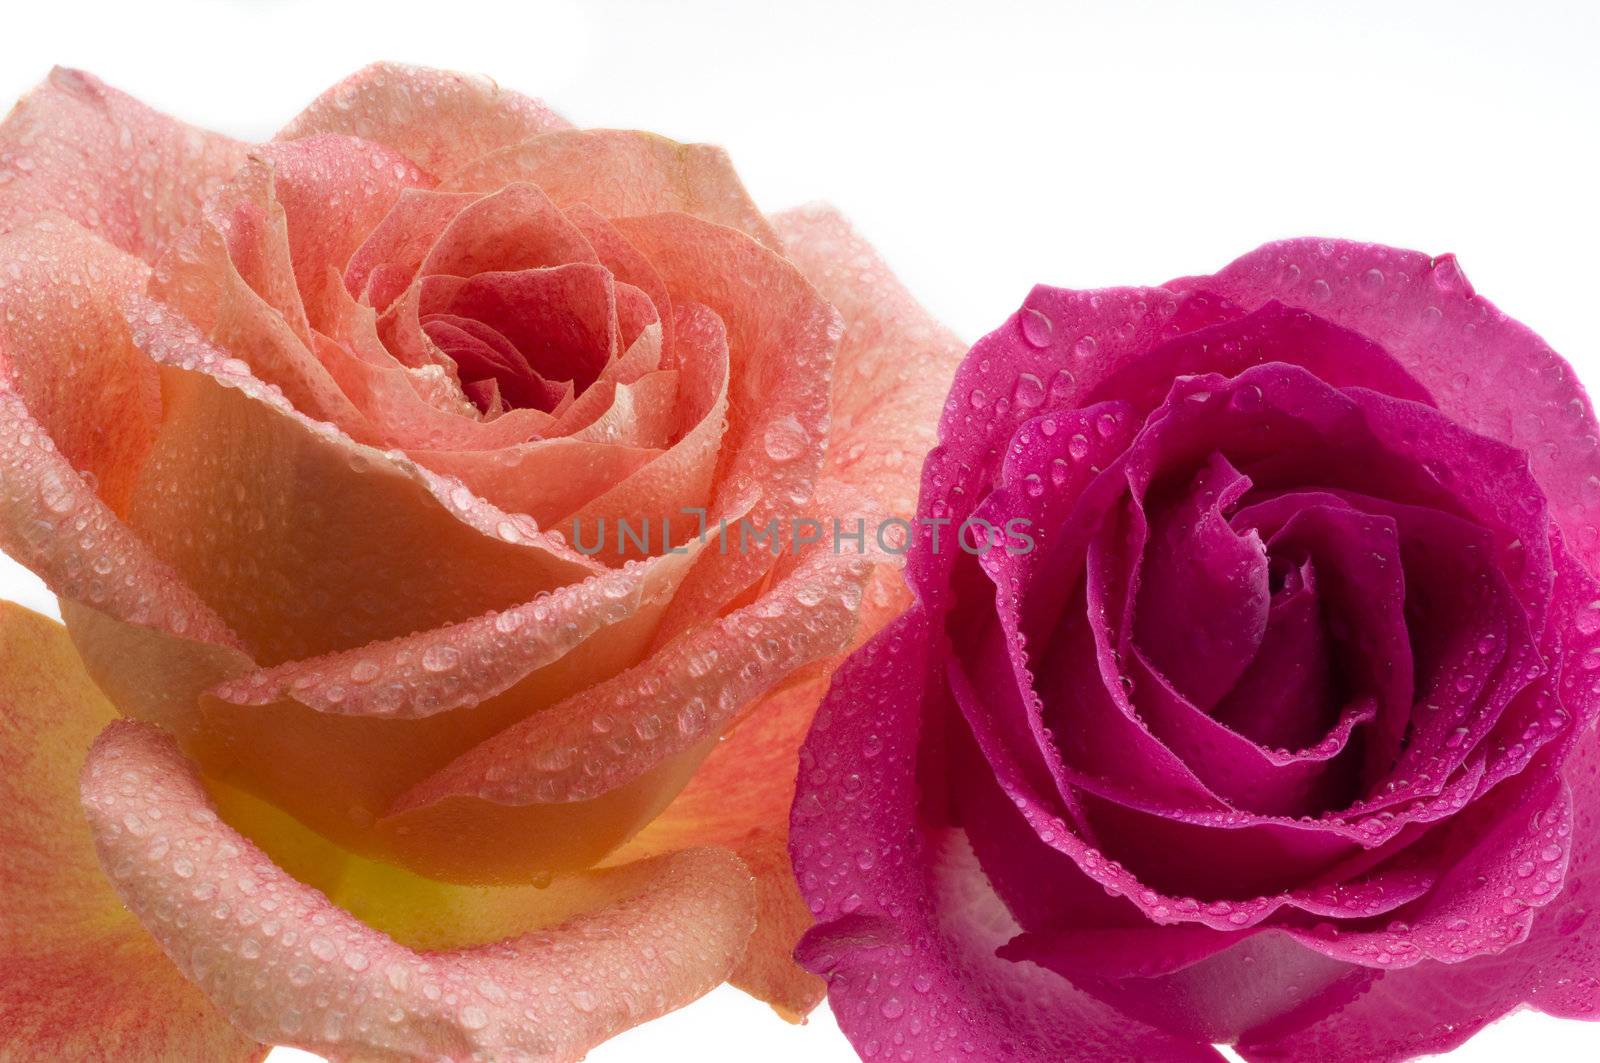 Two Roses on white background both with dew droplets on the petals